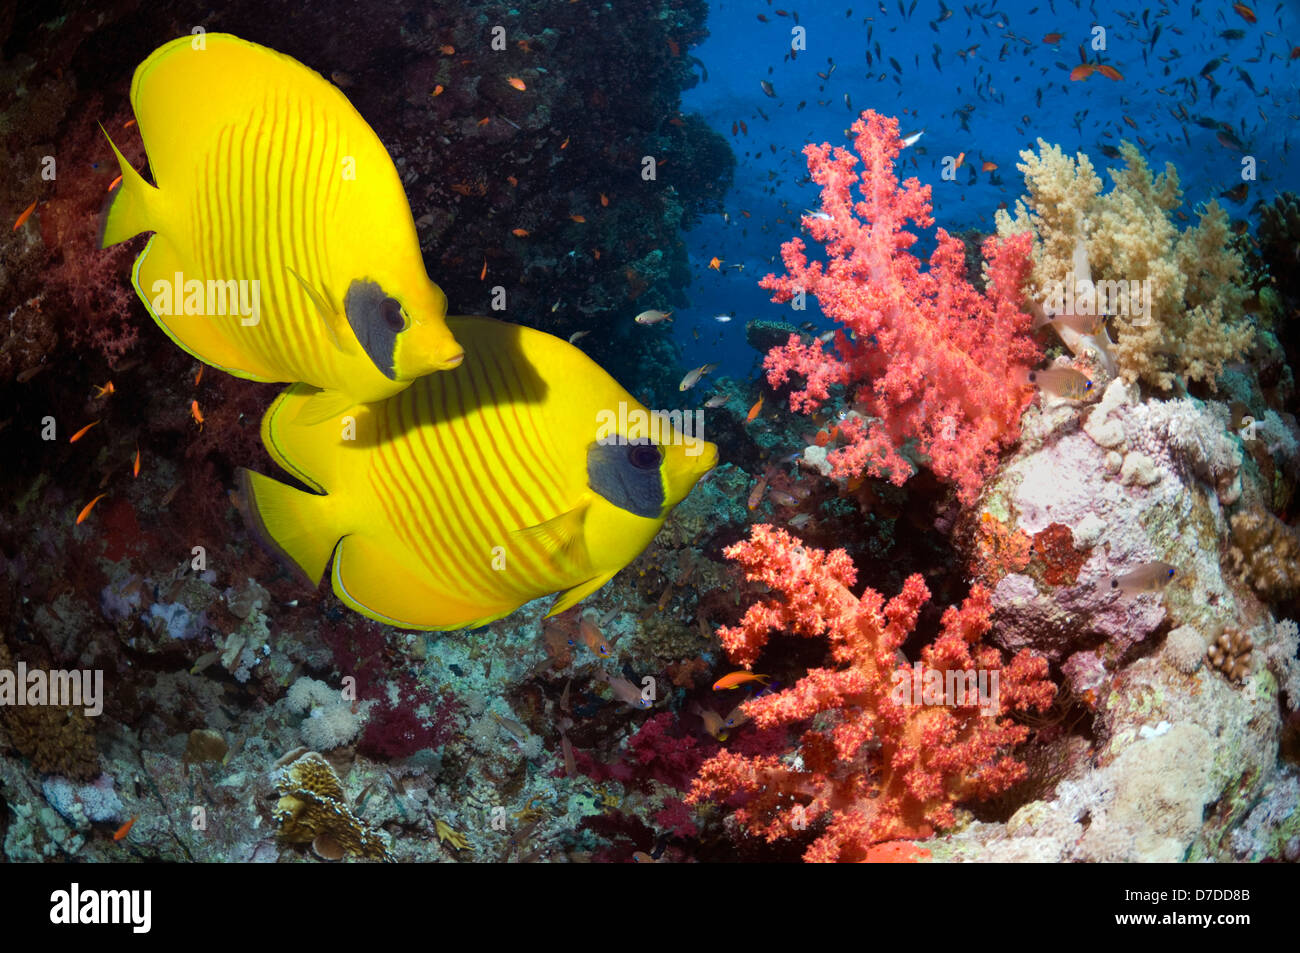 Golden butterflyfish (Chaetodon semilarvatus) with soft corals. Egypt, Red Sea. Stock Photo